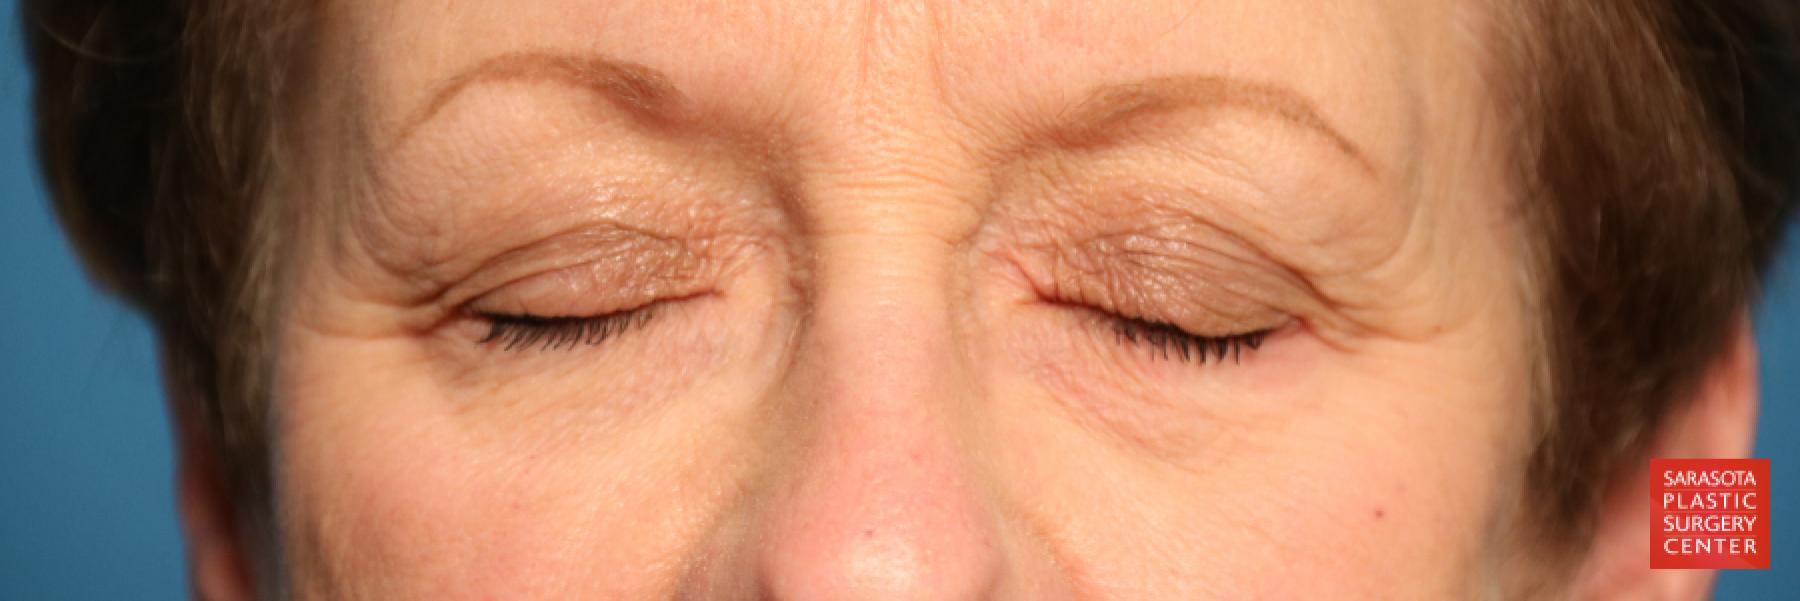 Eyelid Lift: Patient 20 - Before 3